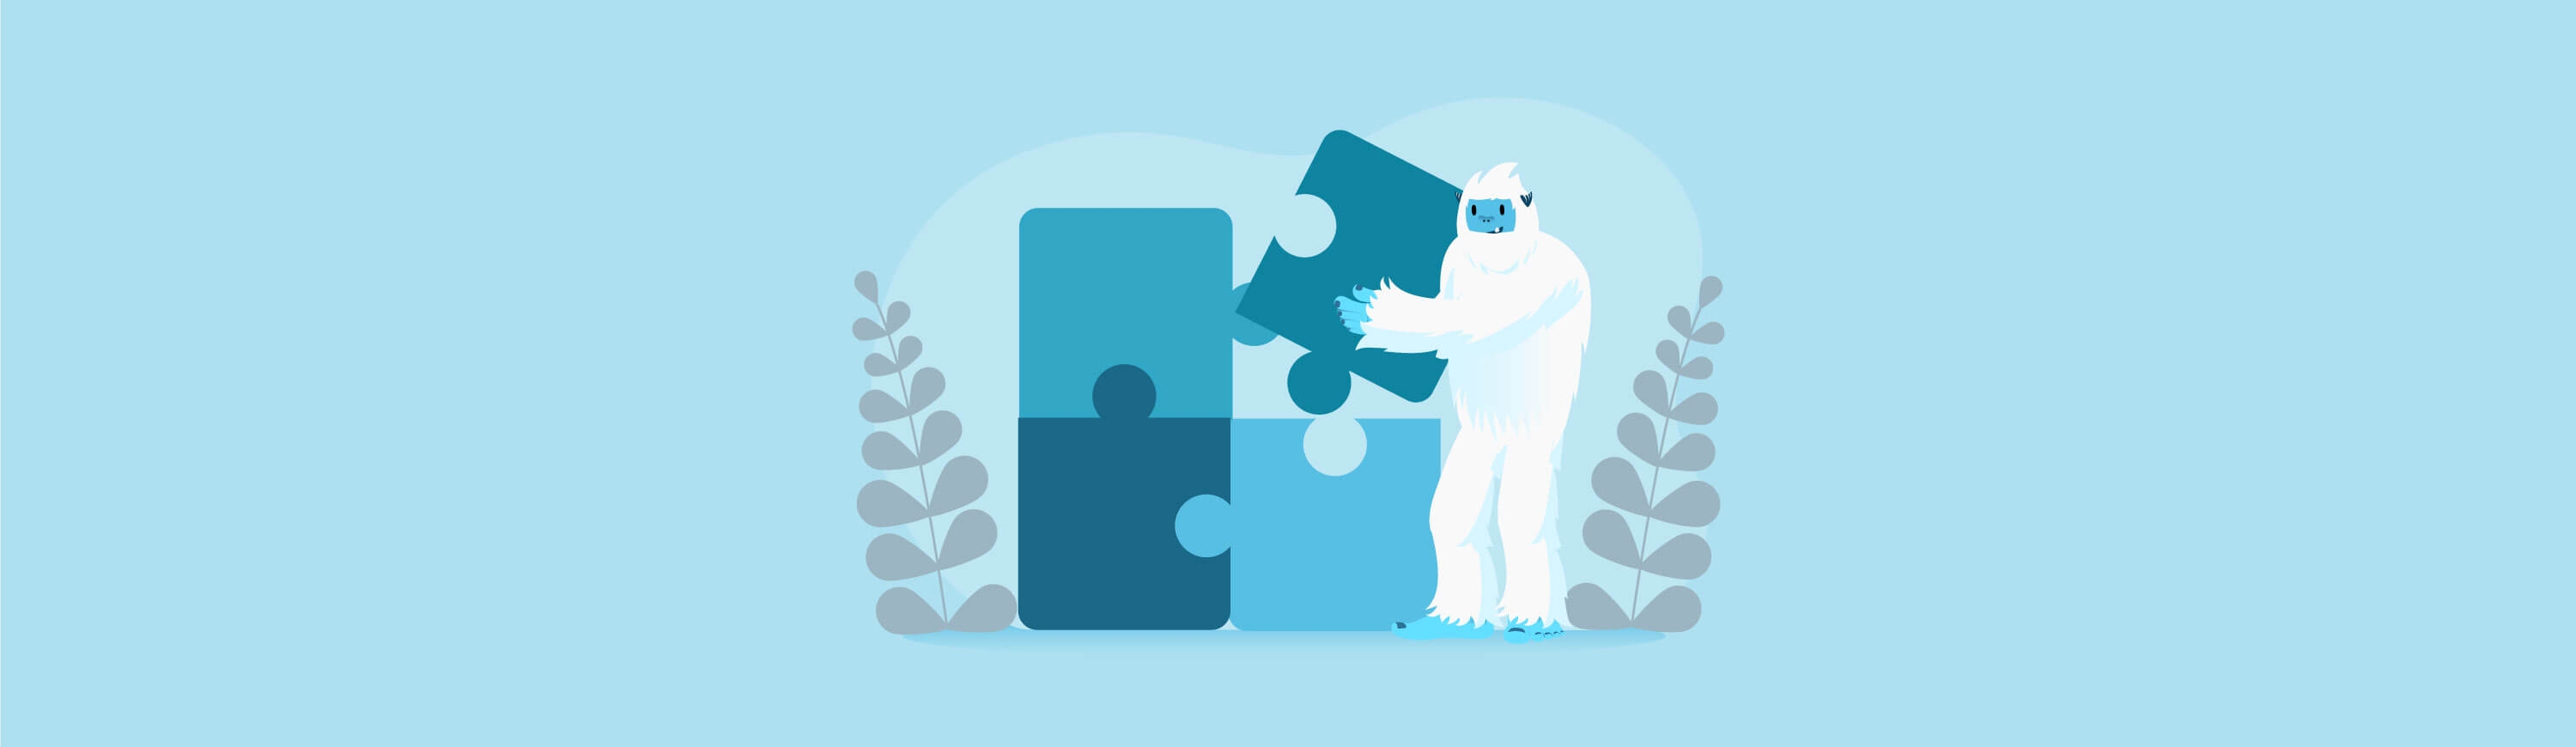 Illustration of Carl the yeti holding several large puzzle pieces.